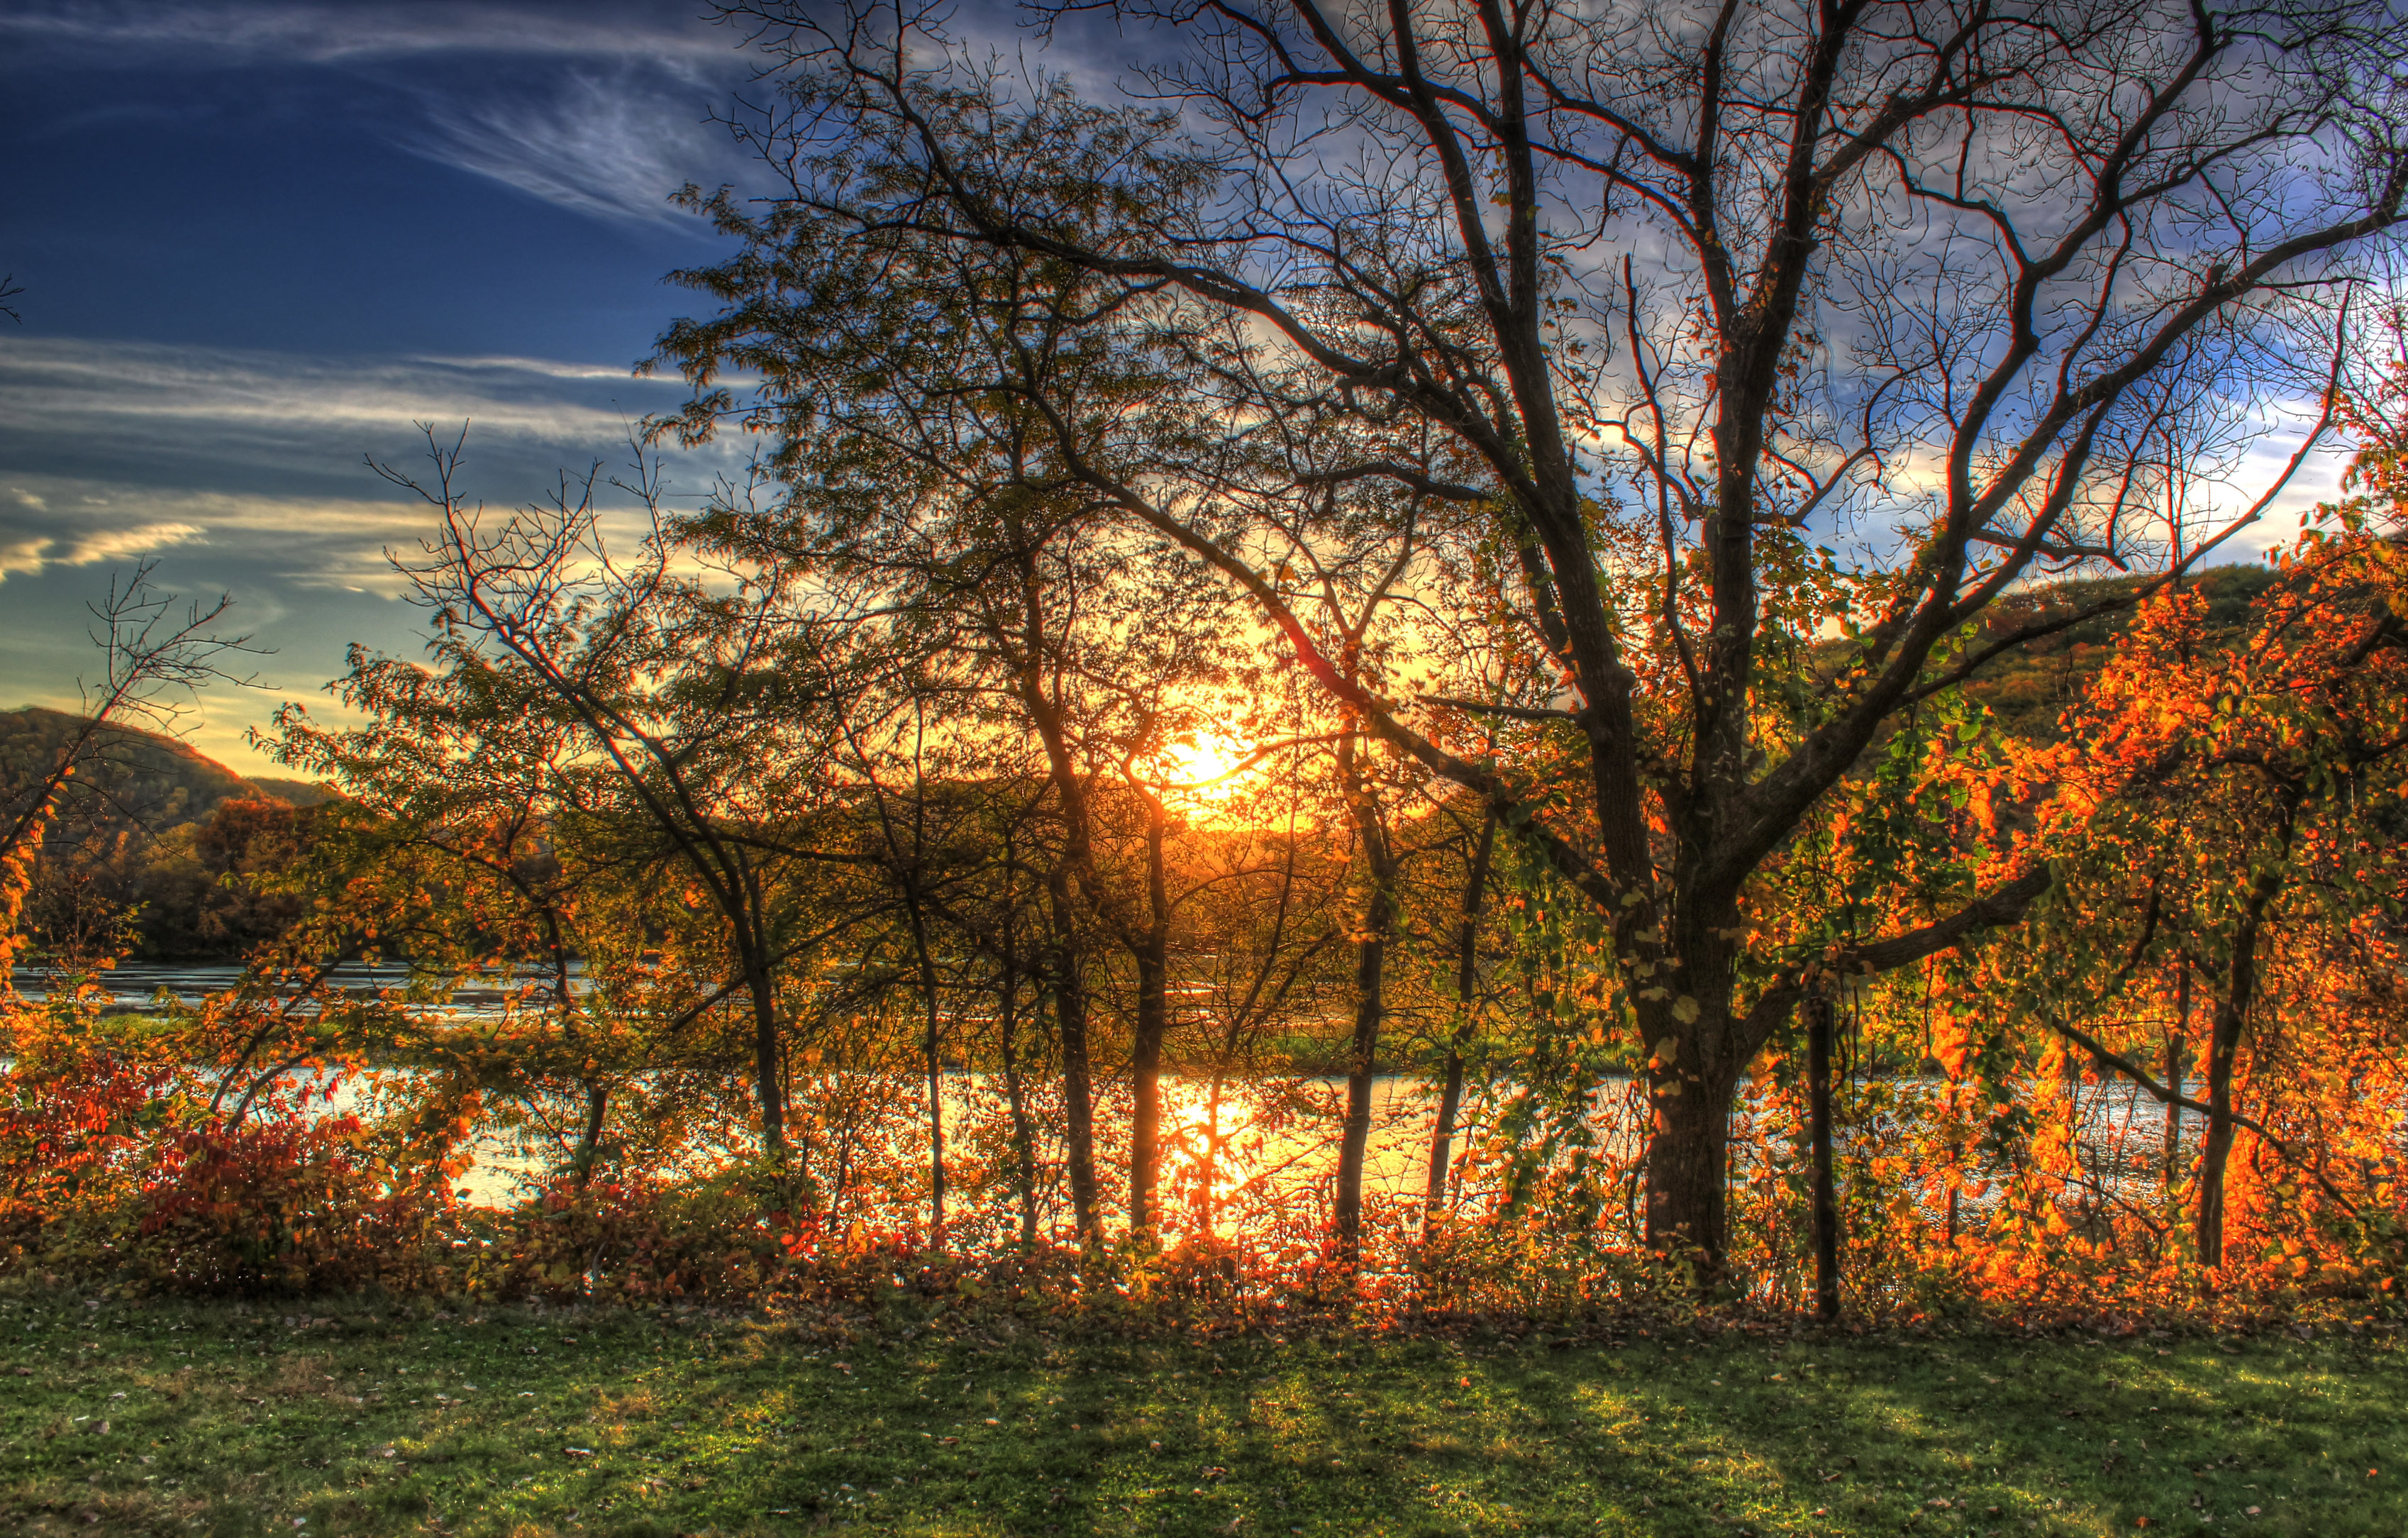 Sunset through the trees at Perrot State Park, Wisconsin image - Free stock photo - Public ...